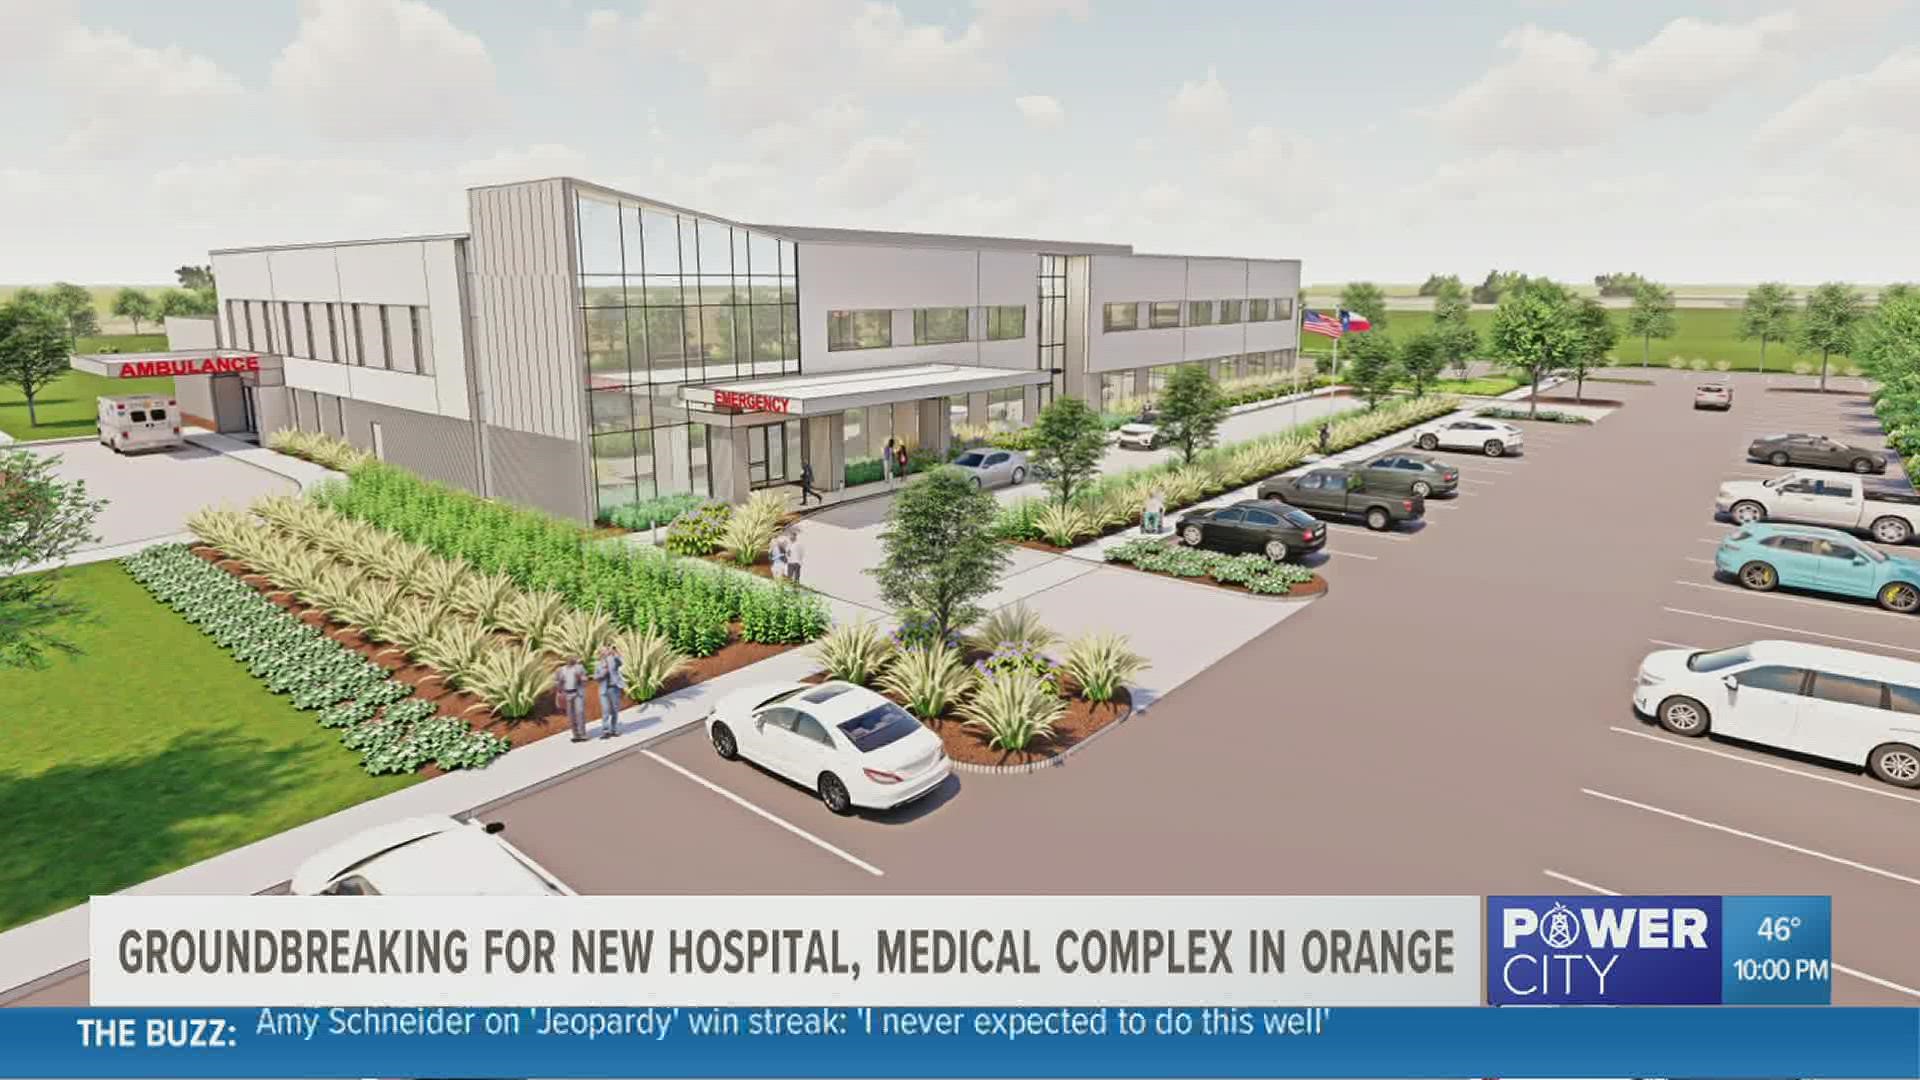 Construction has already begun on the new state-of-the-art hospital. It will be the first hospital in Orange since 2017.